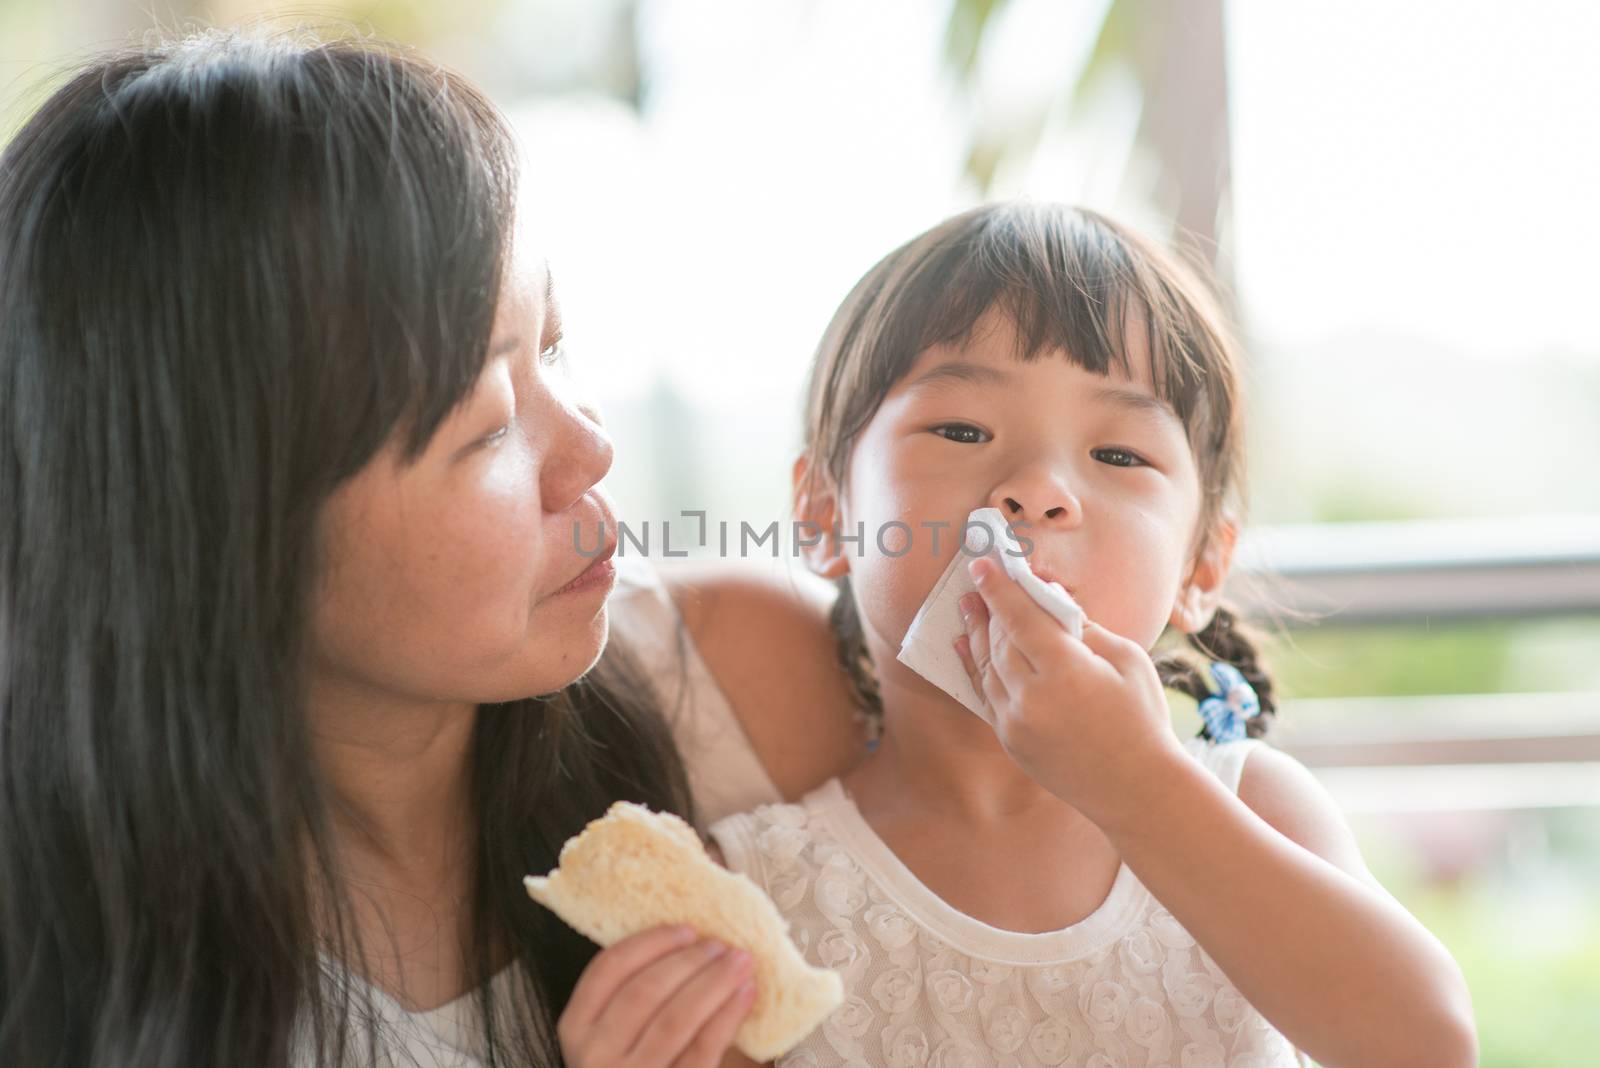 Child wiping her mouth at cafe. Asian family outdoor lifestyle with natural light.